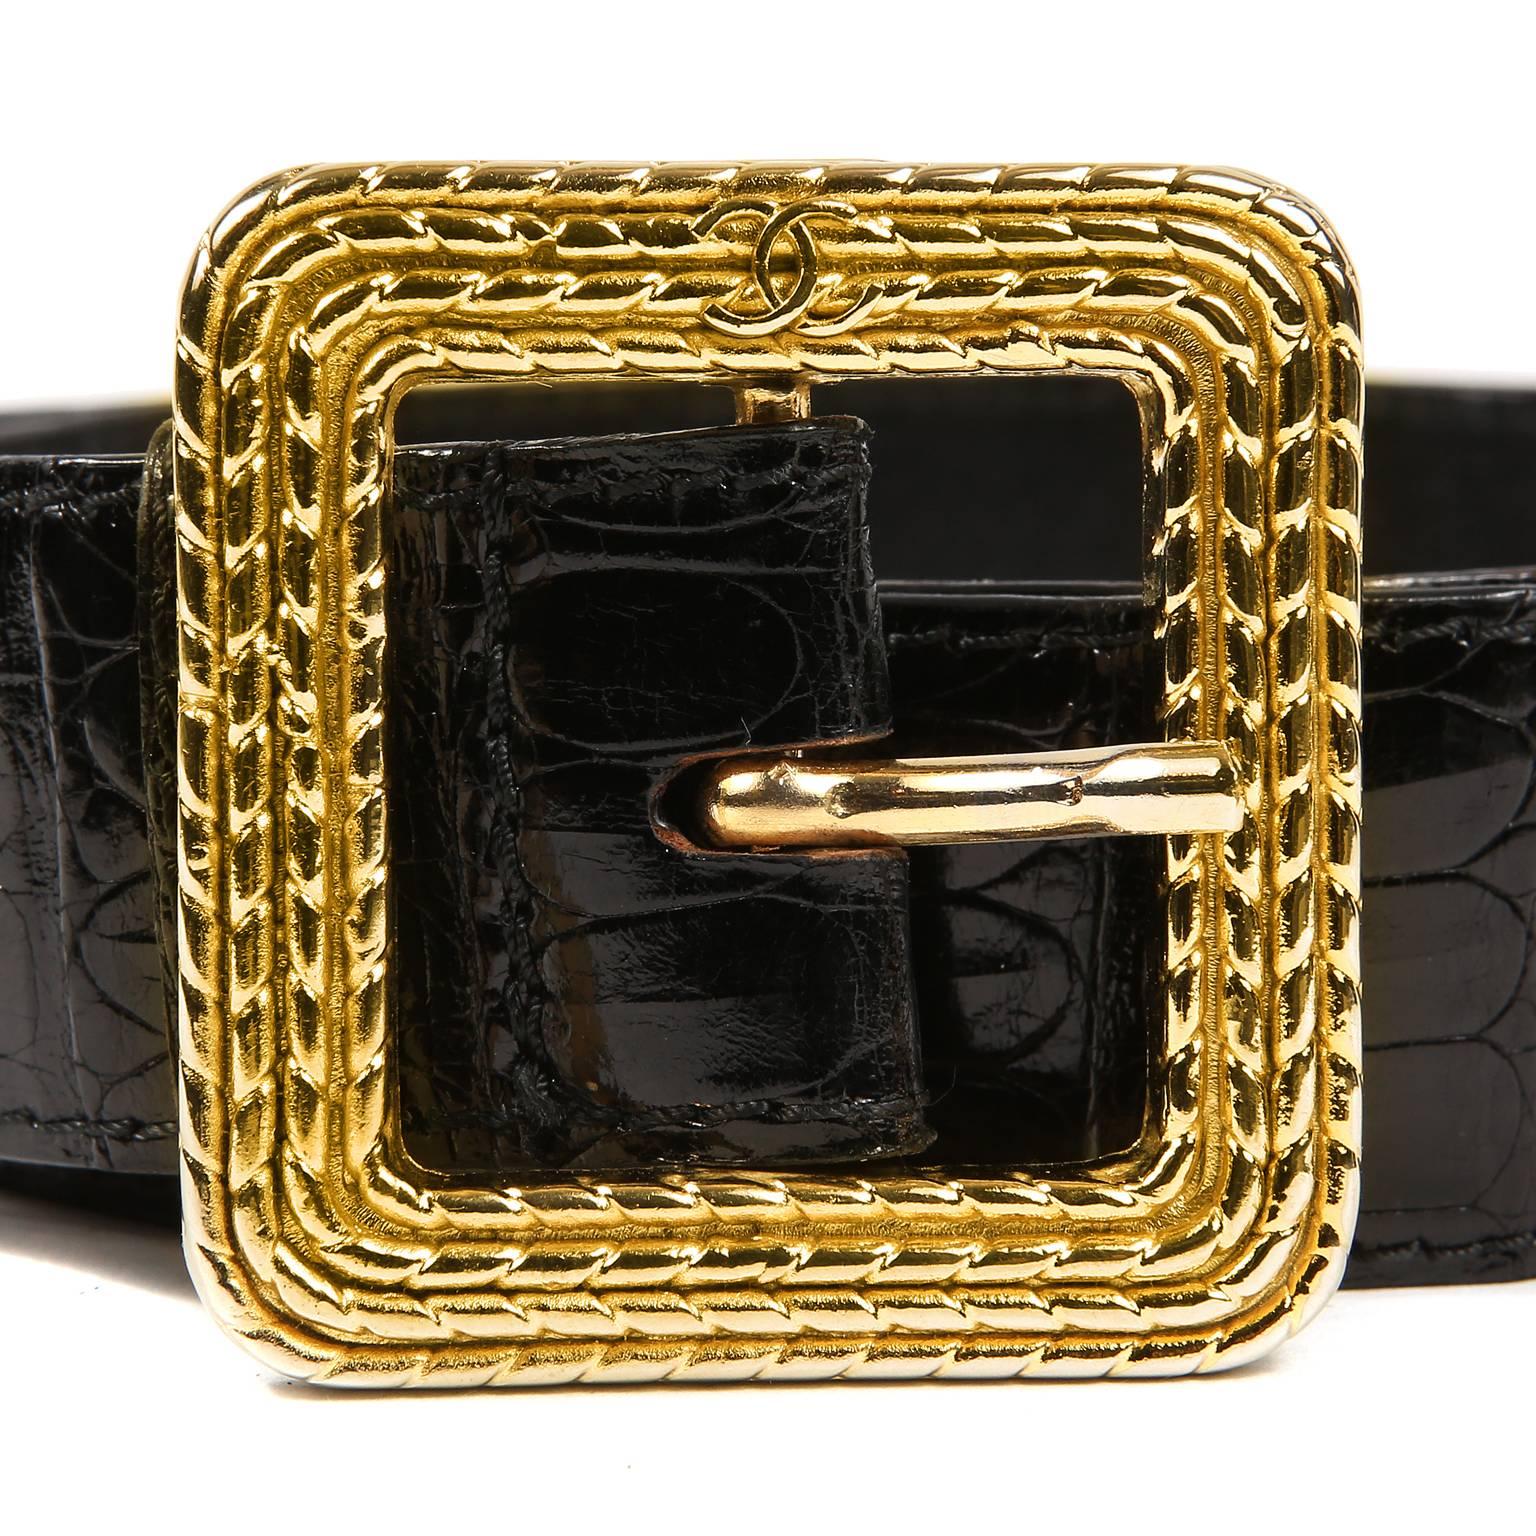 Chanel Black Crocodile Square Buckle Belt- Excellent Condition
 This beautiful piece has a wide width with a large gold textured square buckle. Size 85/ 34.  Made in Italy.   